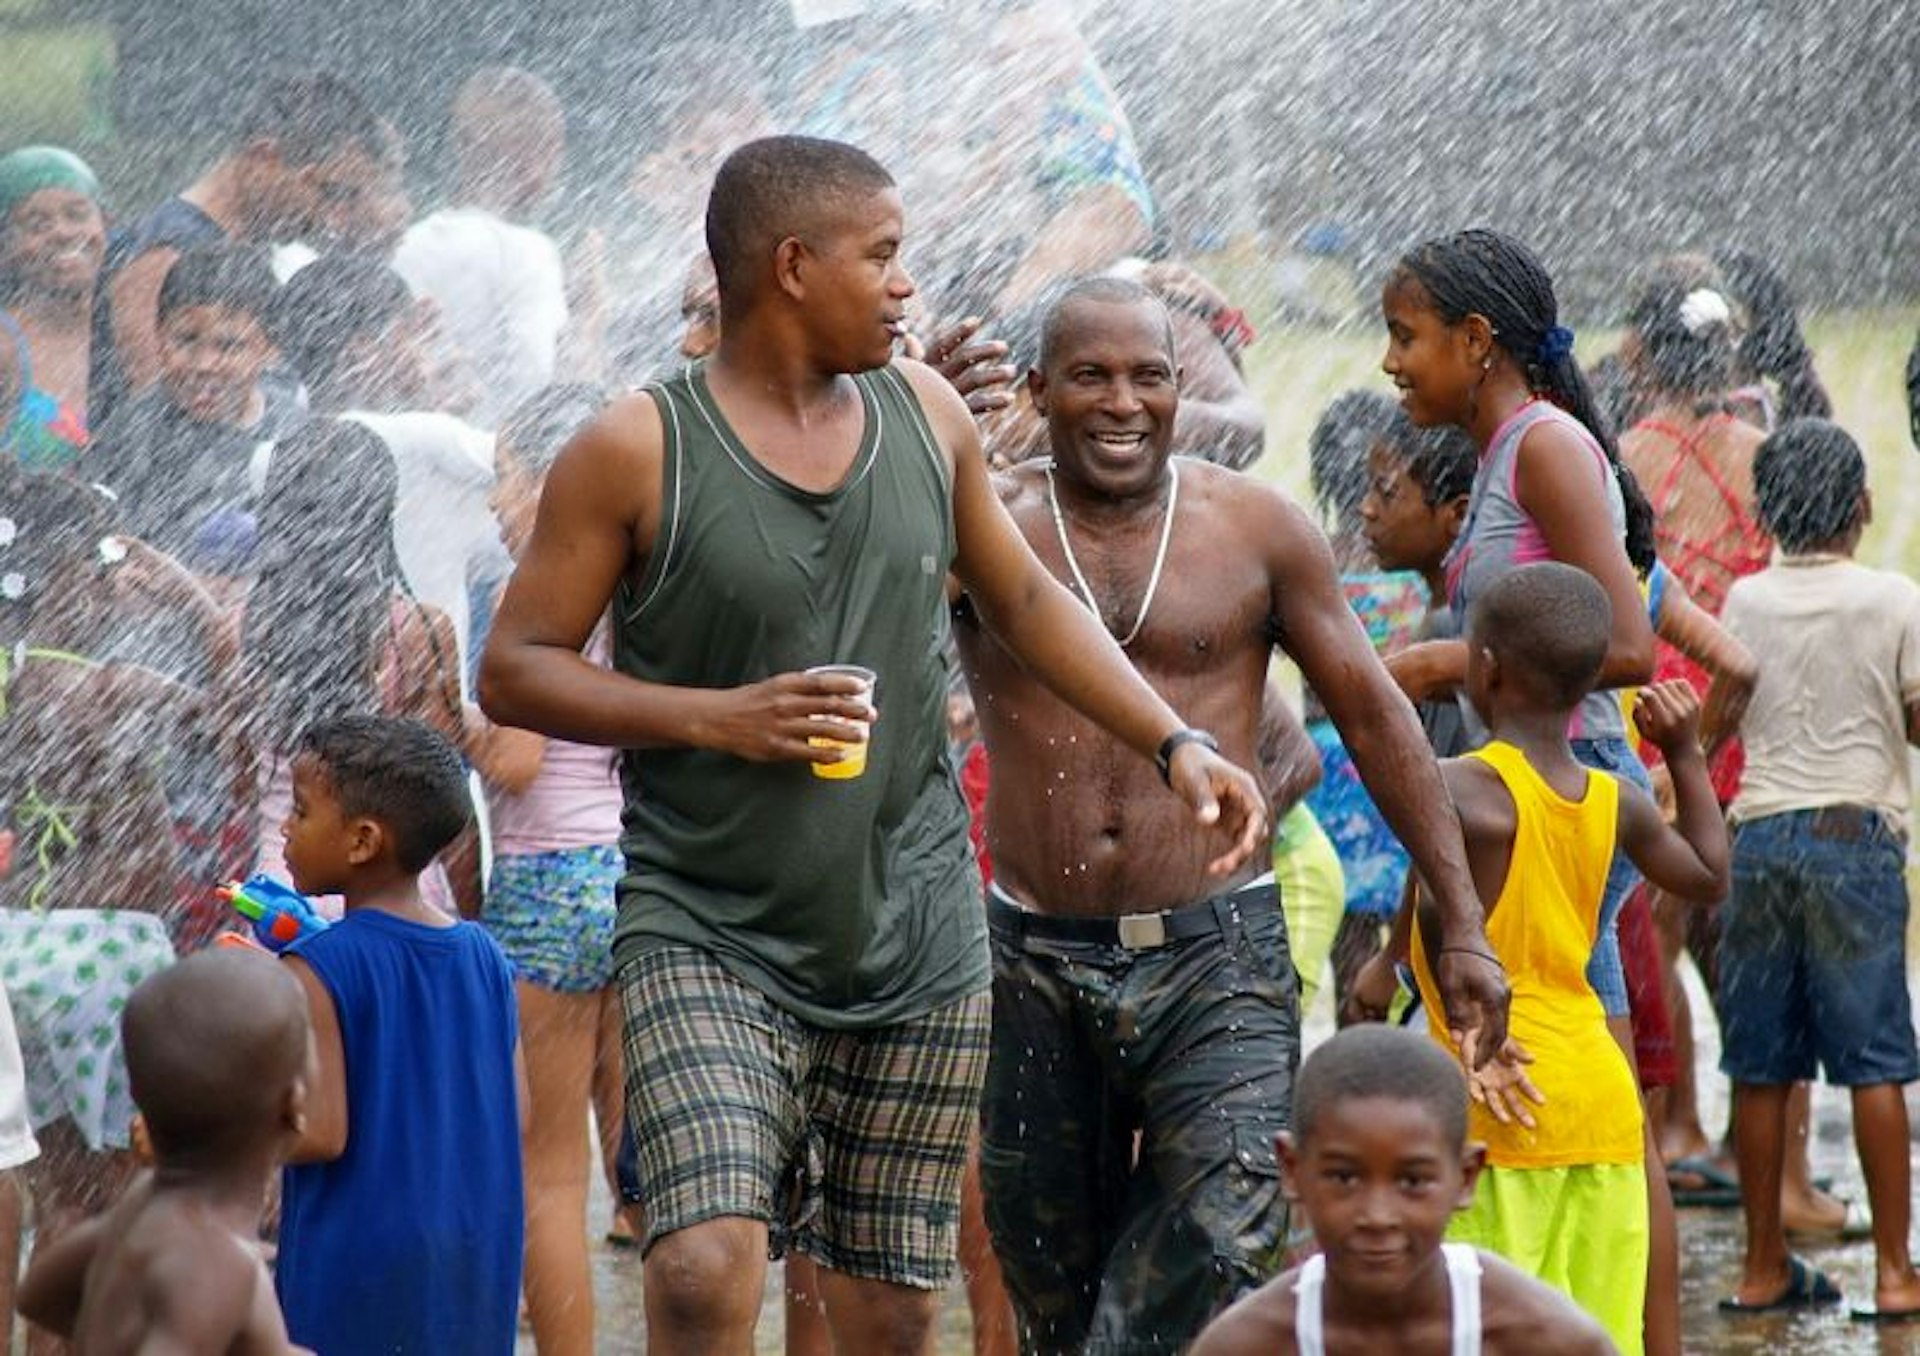 Getting wet in the Mojadera in Portobelo during a celebration